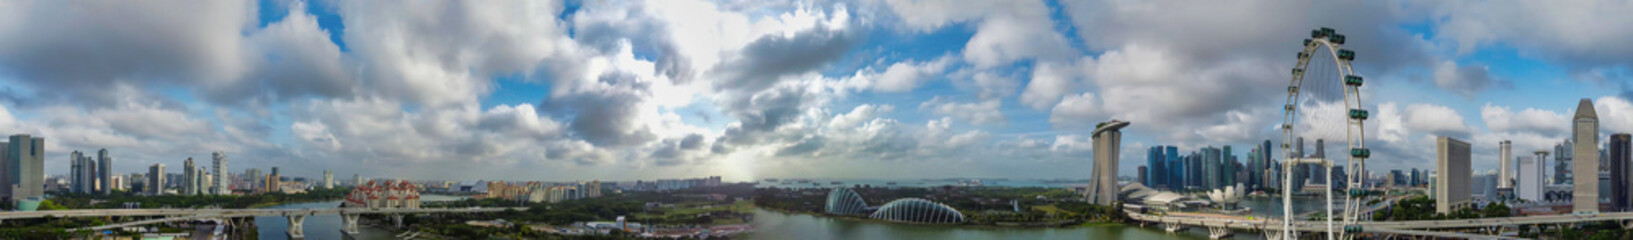 SINGAPORE - JANUARY 2, 2020: Aerial panoramic view of city skyline from ferrys wheel